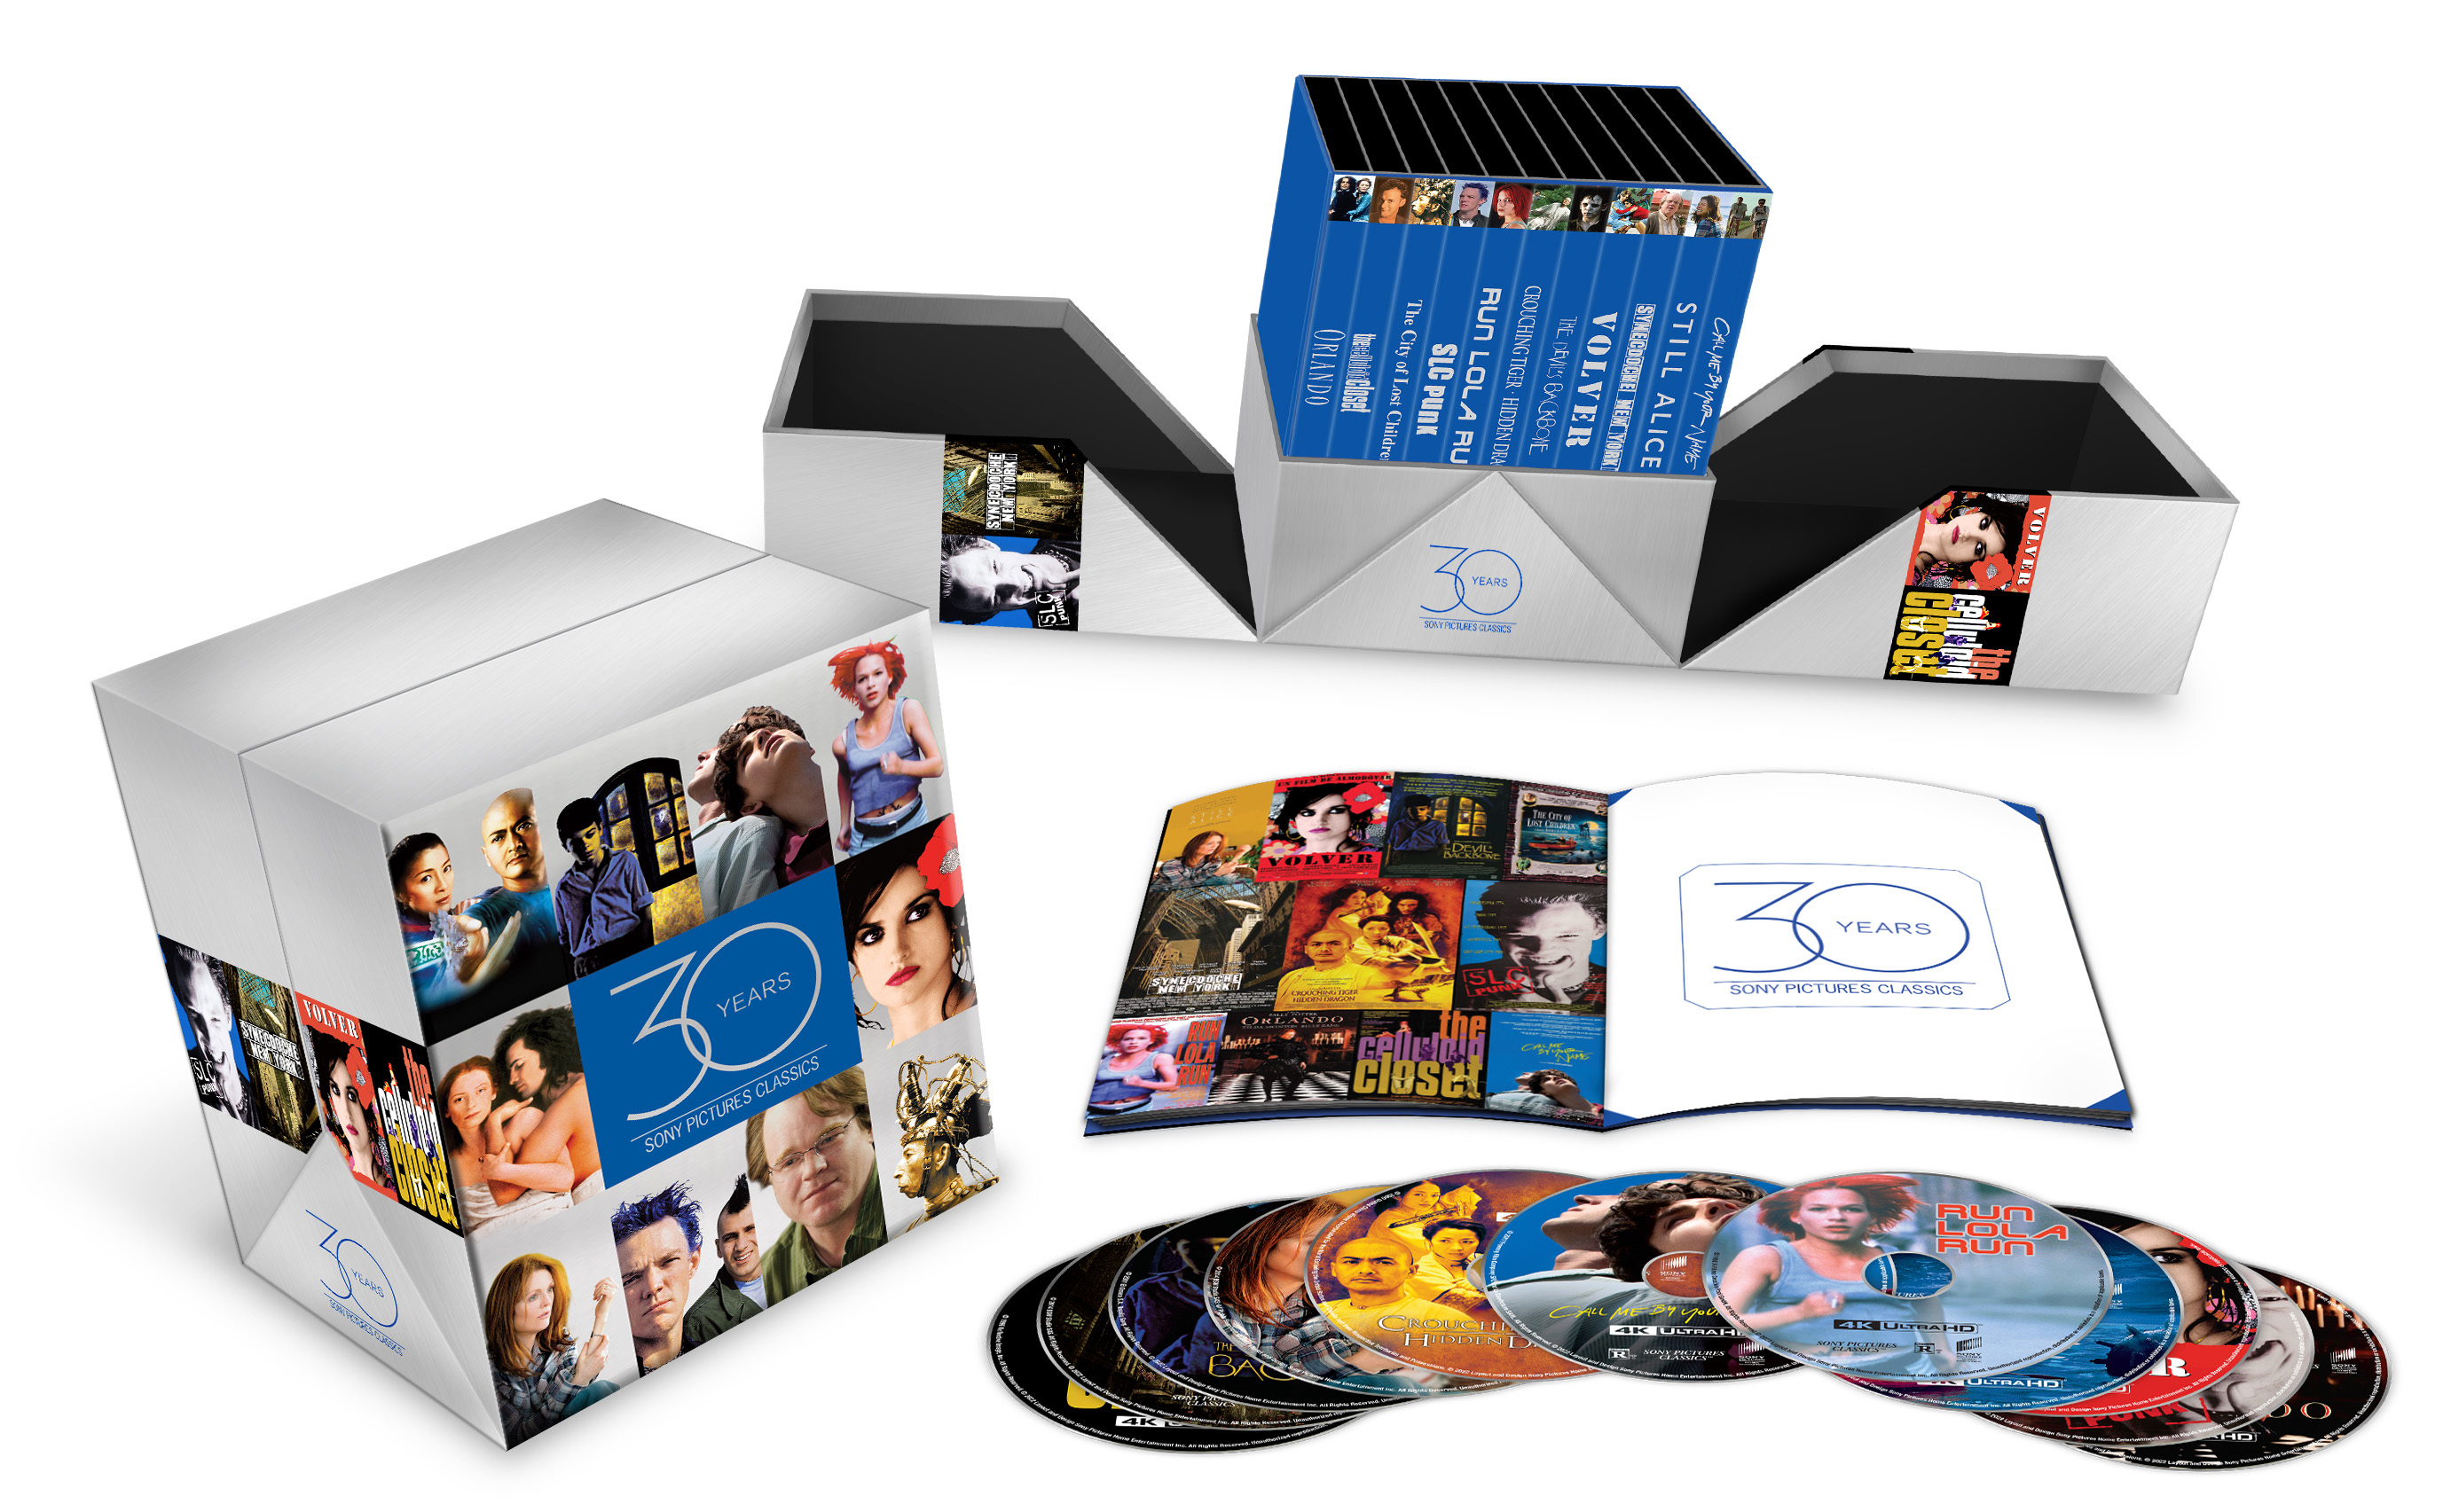 Sony Pictures Classics 30th Anniversary 4K Ultra HD Collection [4K Ultra HD Blu-ray]